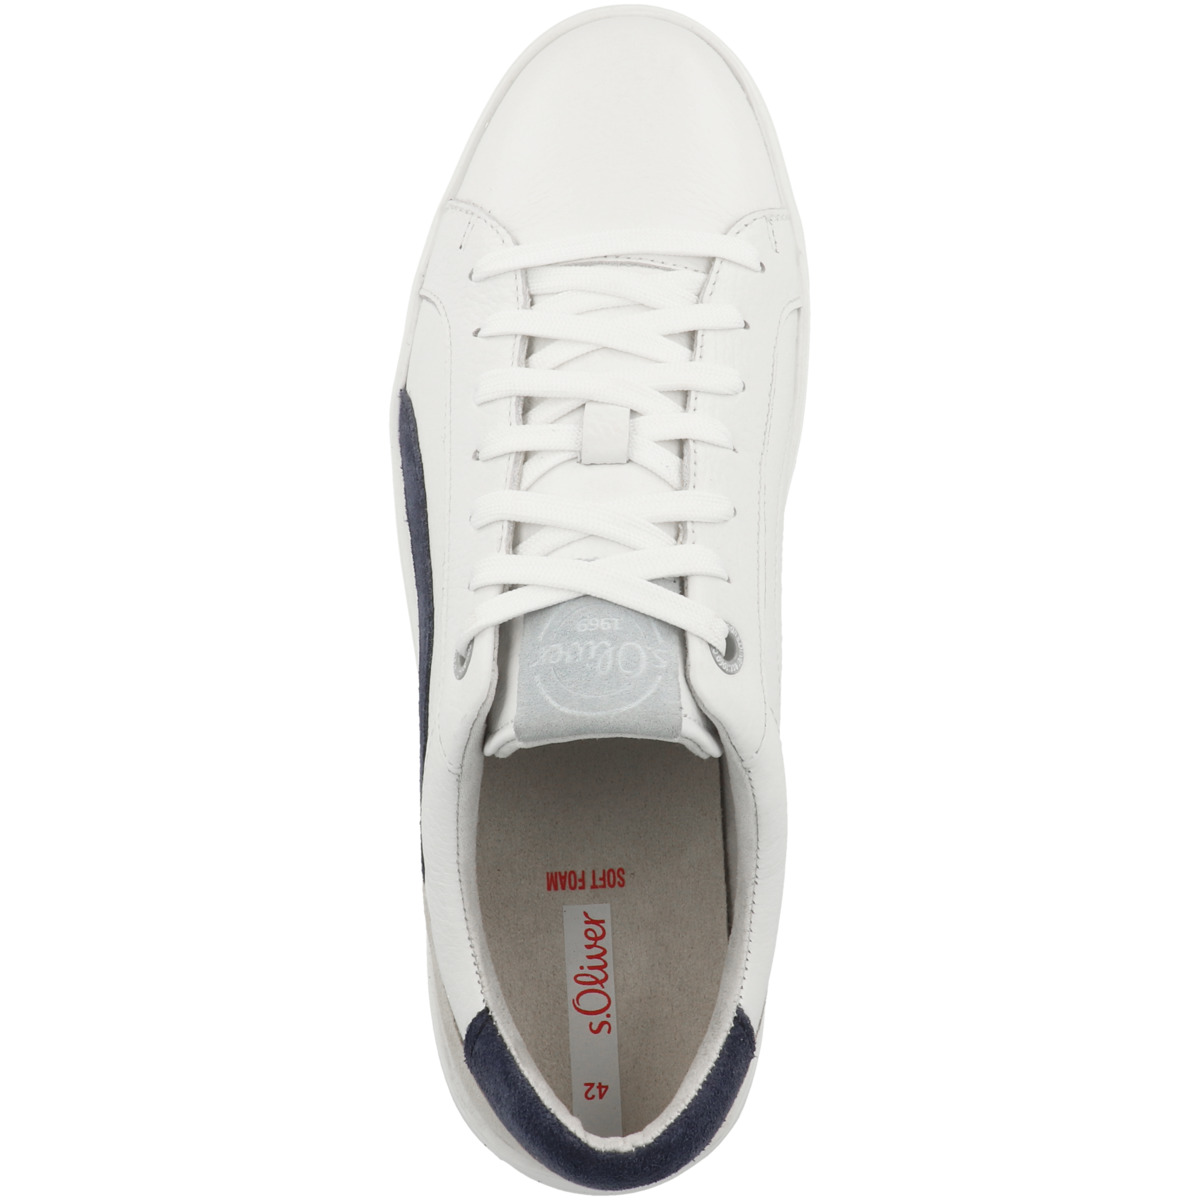 s.Oliver 5-13671-30 Sneaker low weiss